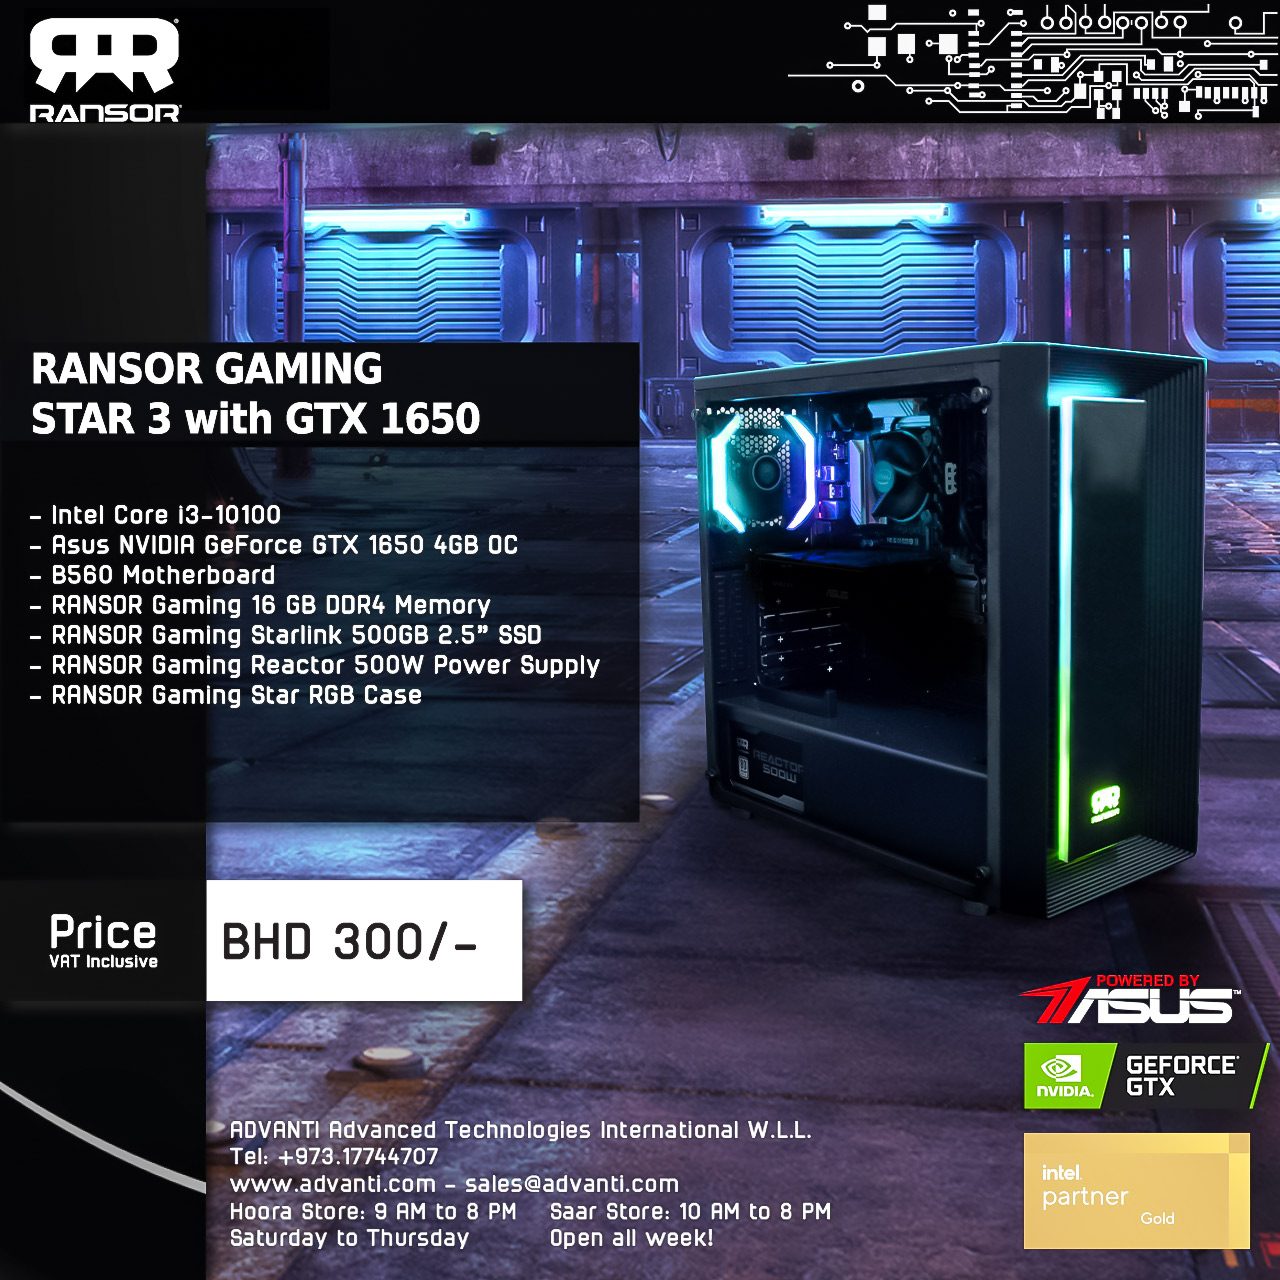 ransor-gaming-star-3-with-gtx-1650-%28rn